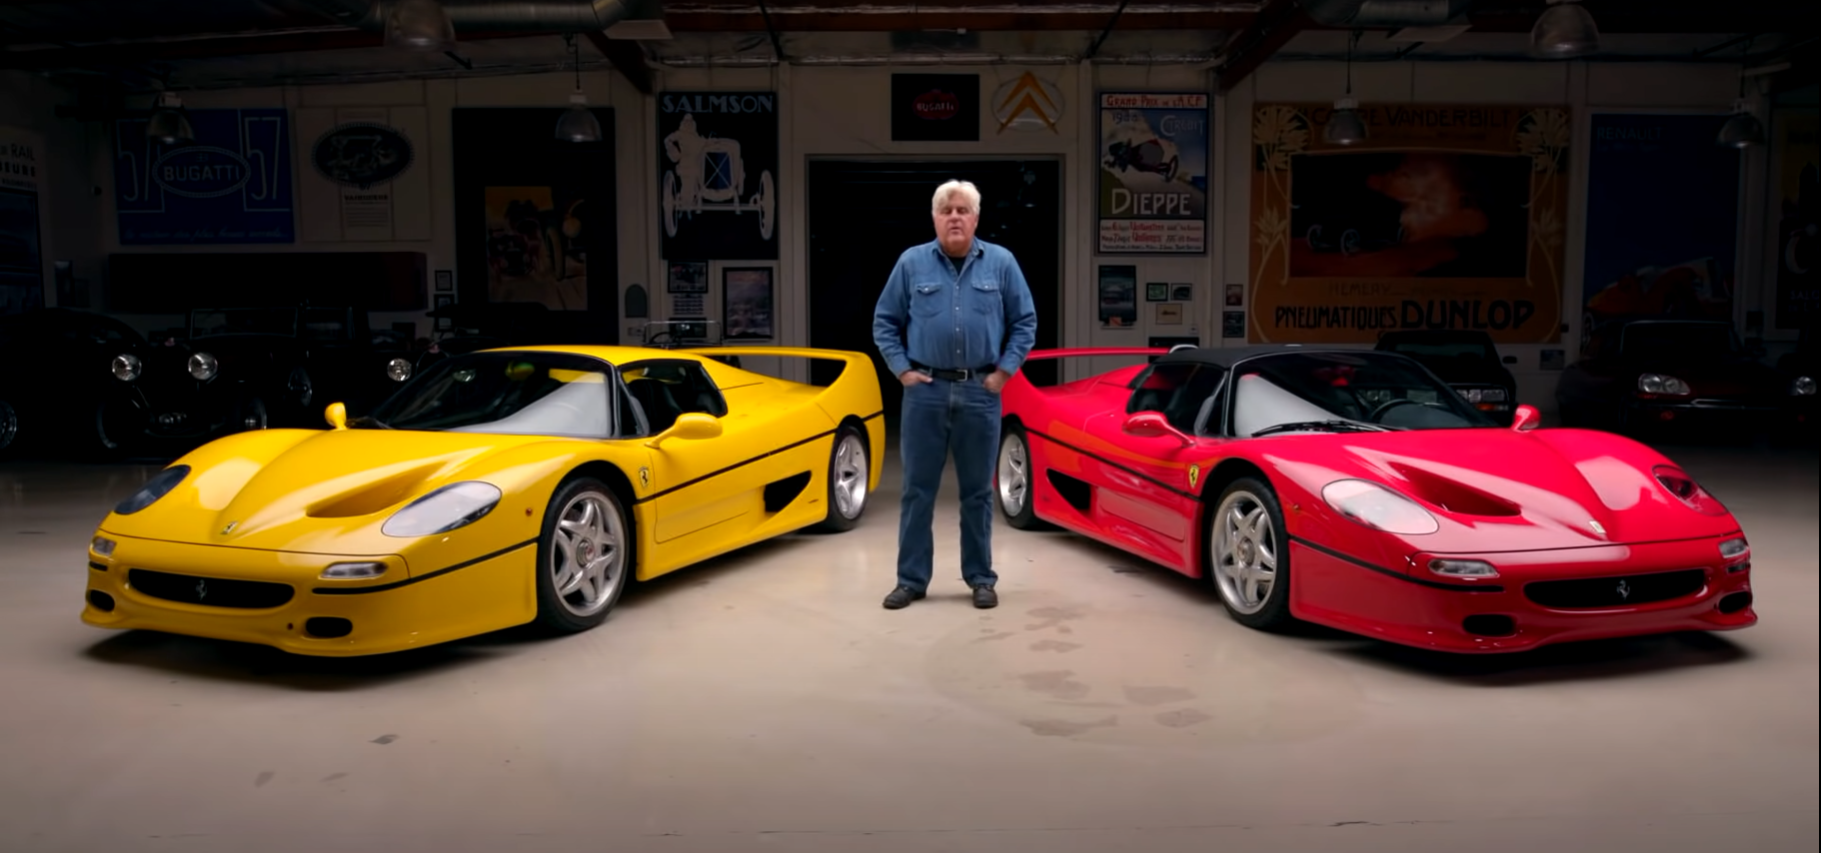 Jay Leno standing in front of yellow and red Ferrari F50